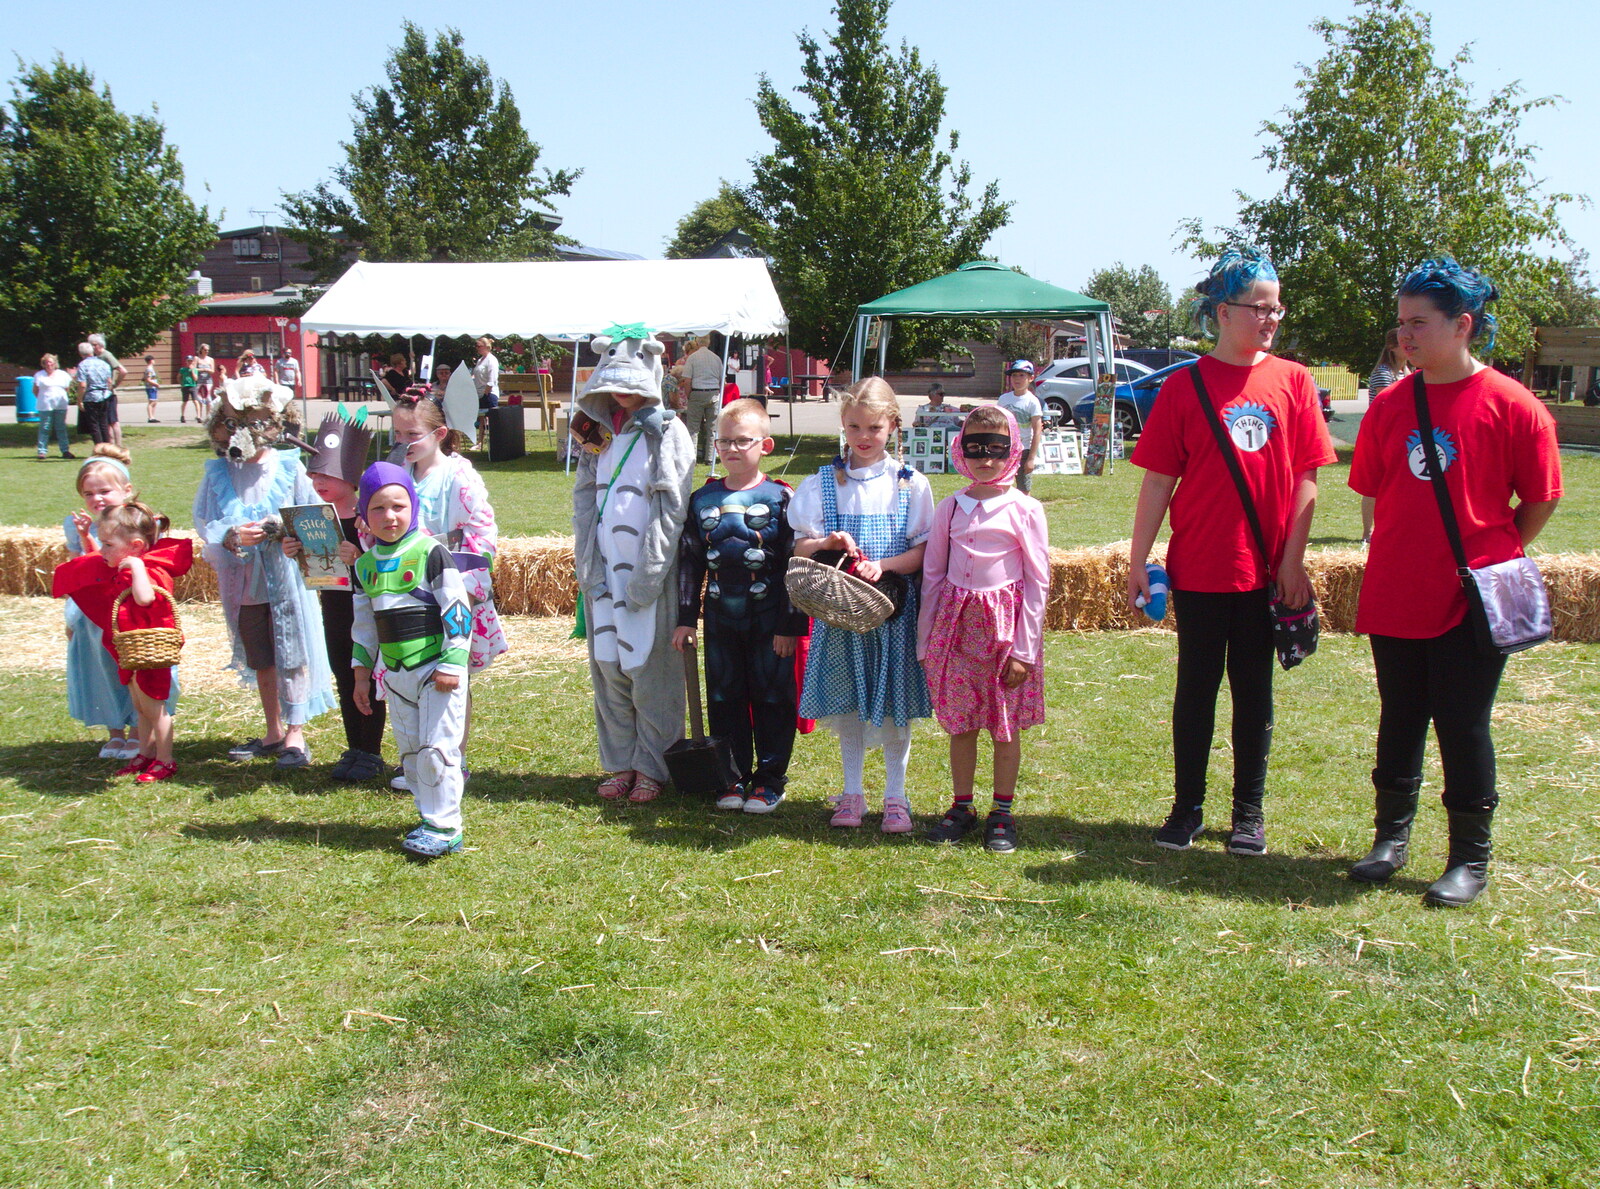 The fancy dress competition is judged from GSB and the Gislingham Fete, Suffolk - 29th June 2019